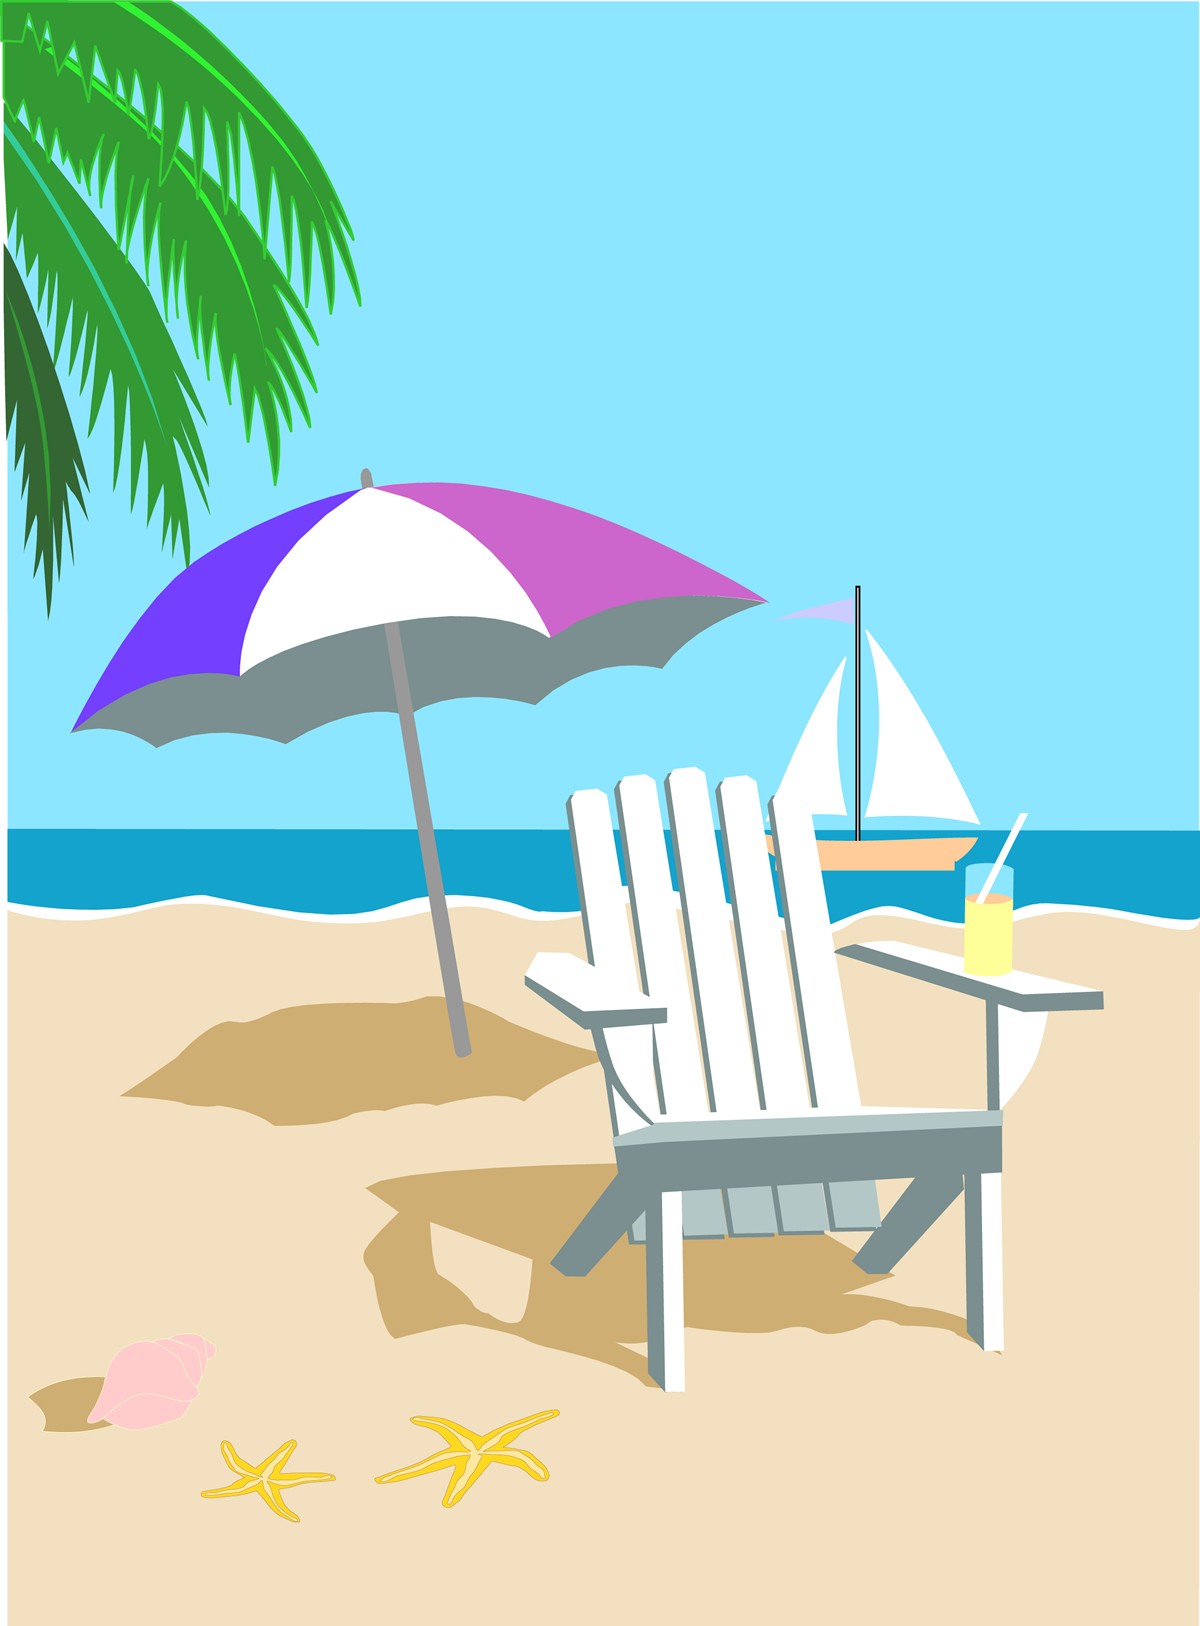 15 Cartoon Images Beach Free Cliparts That You Can Download To You